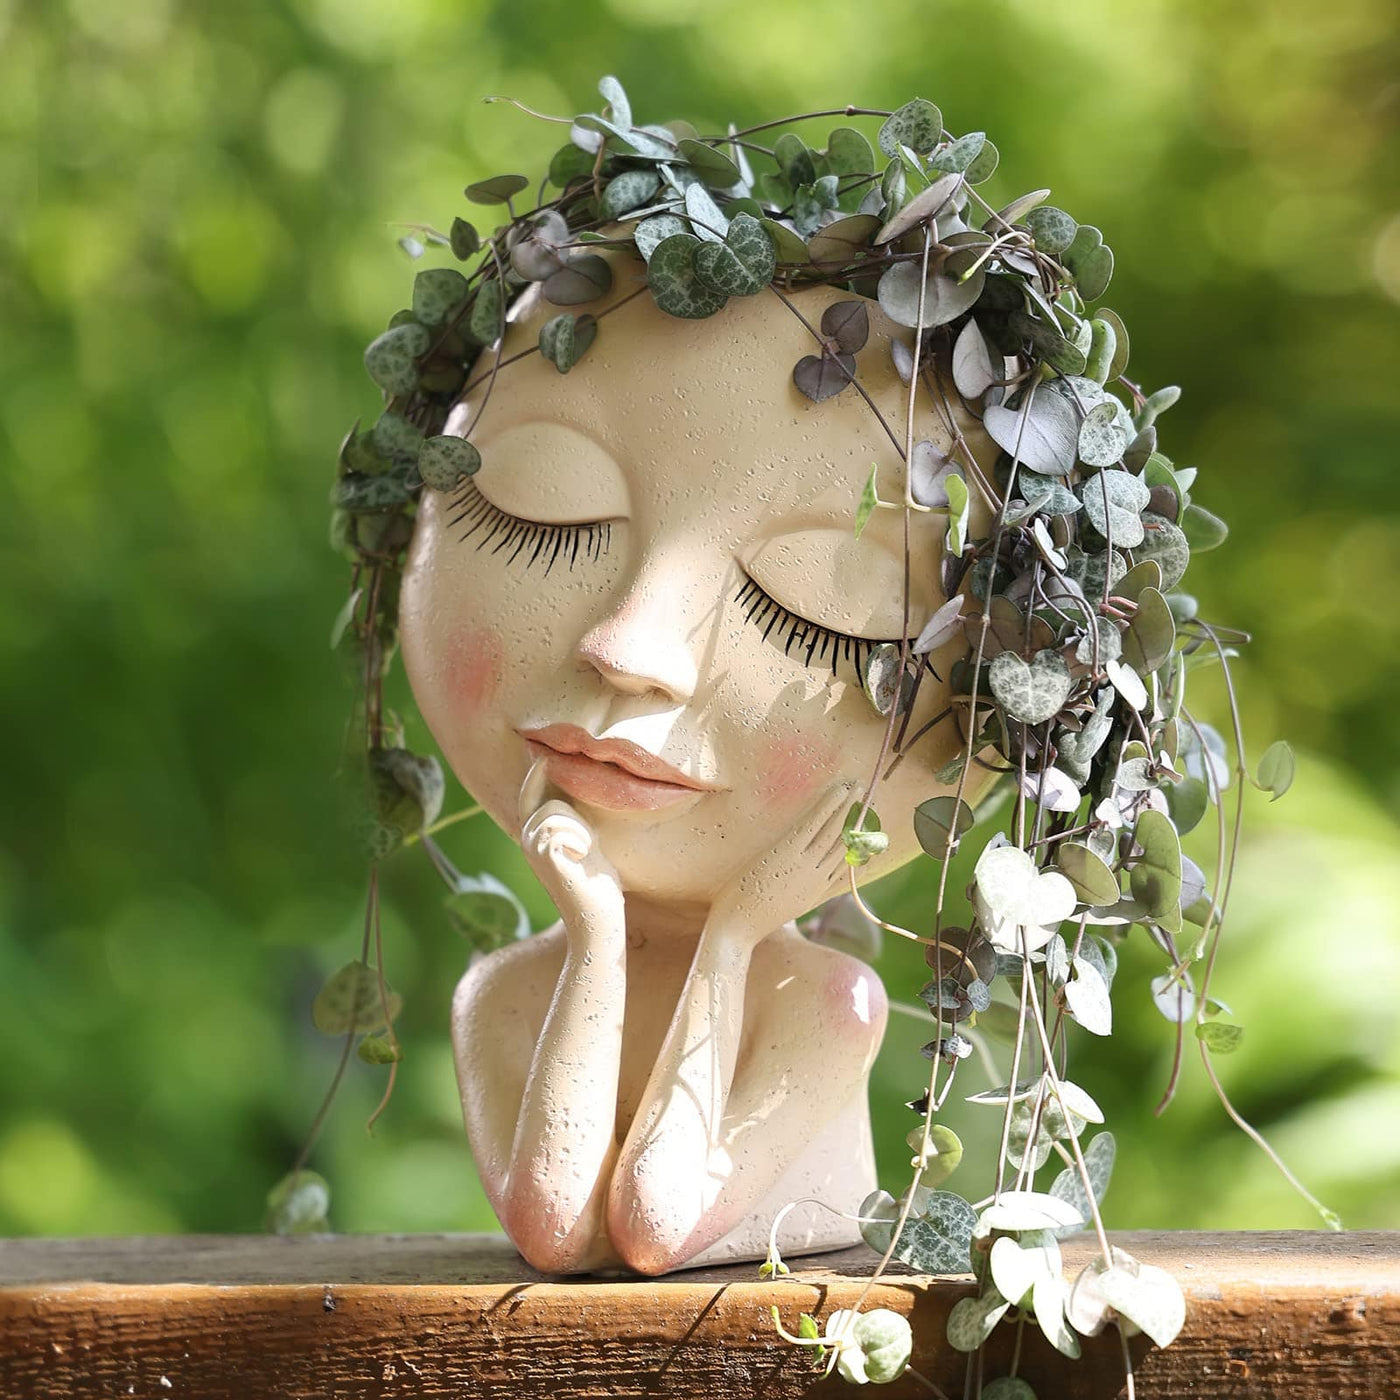 wickedafstore Thoughtful Lady Planter